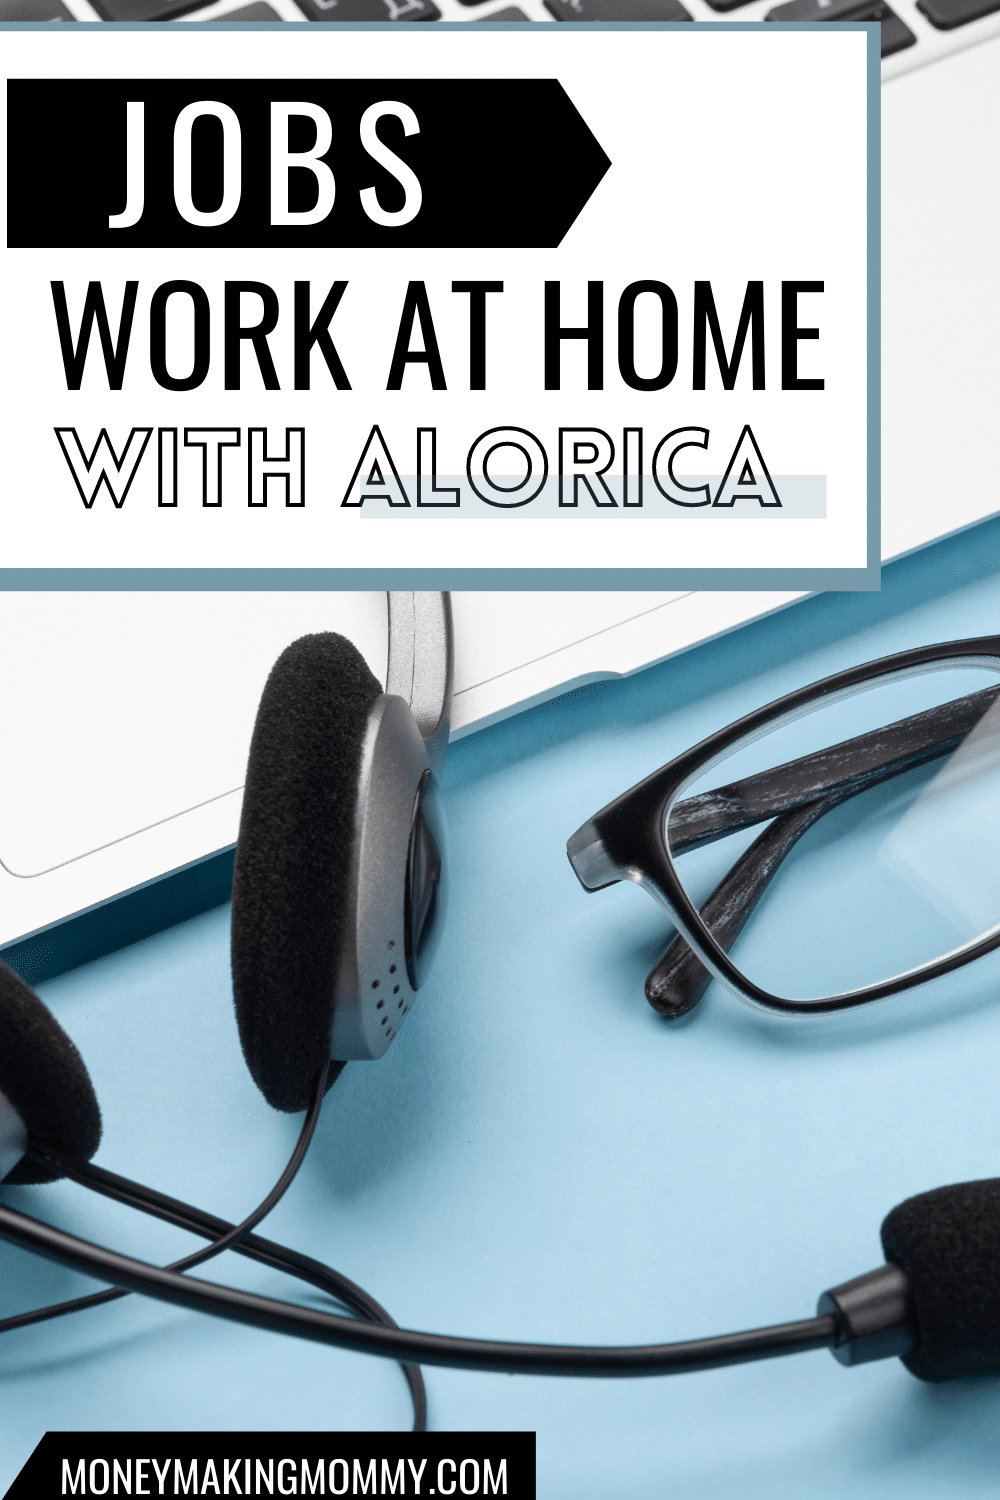 Alorica Work at Home Jobs